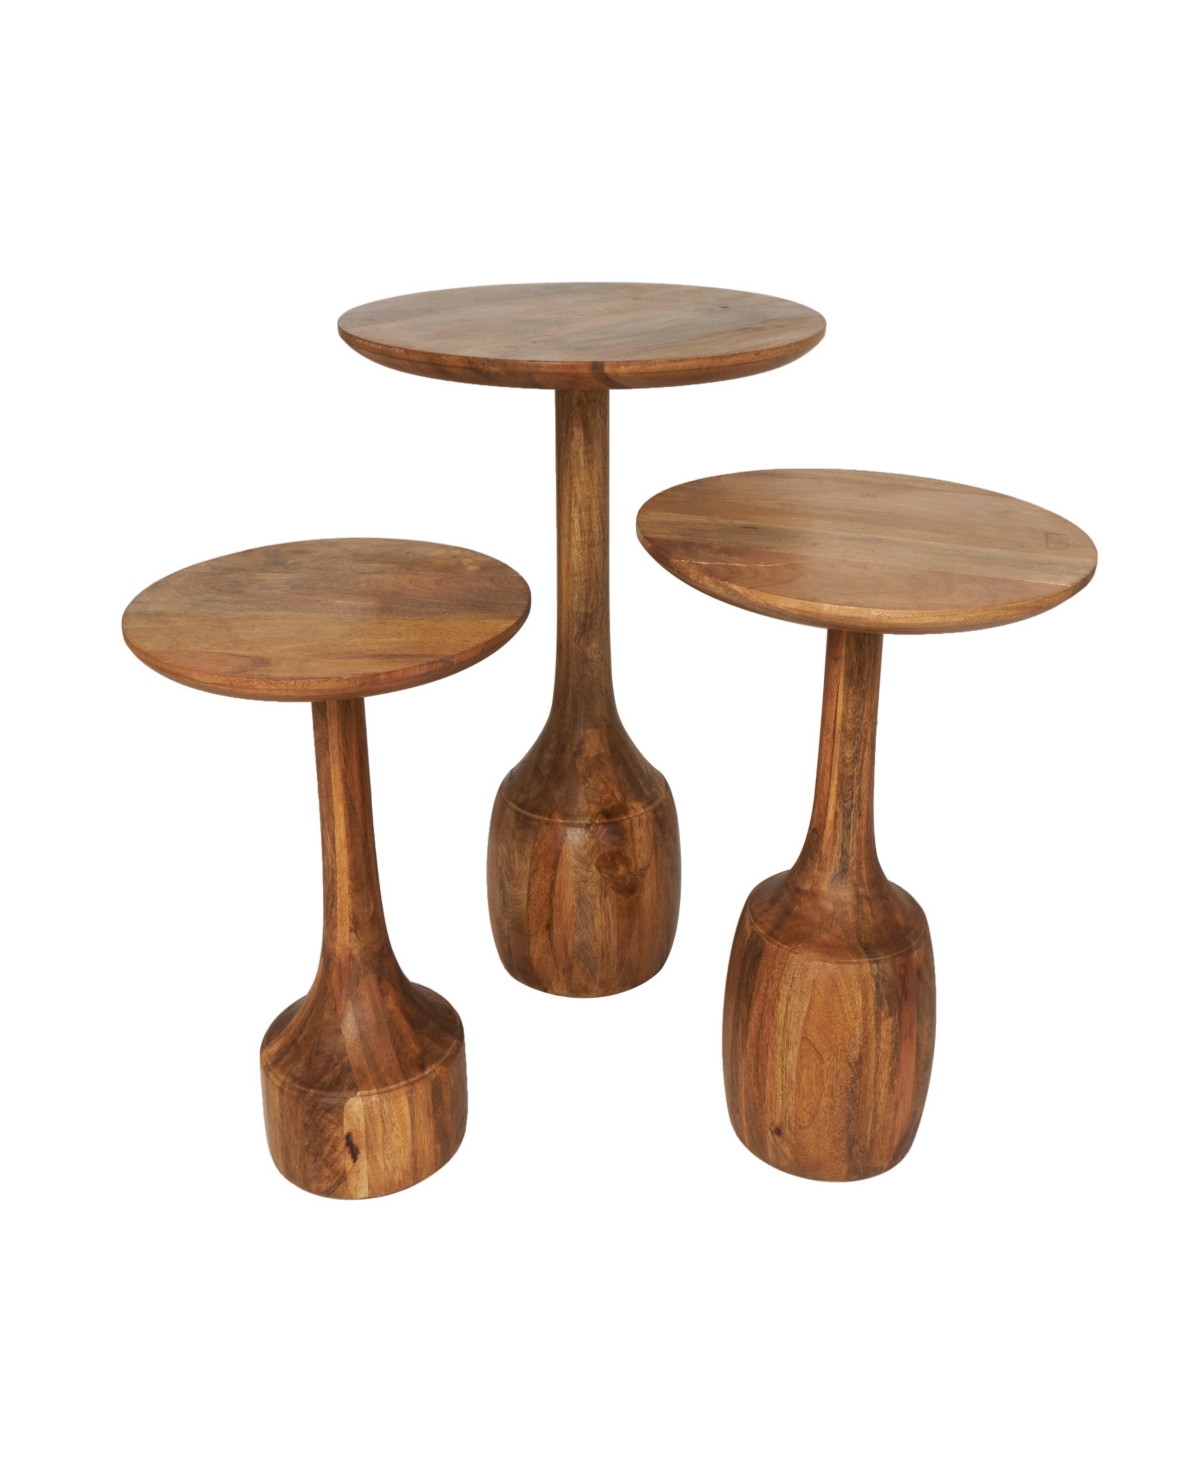 Rosemary Lane Set Of 3 Mango Wood Handmade Elevated Bases Accent Table In Brown